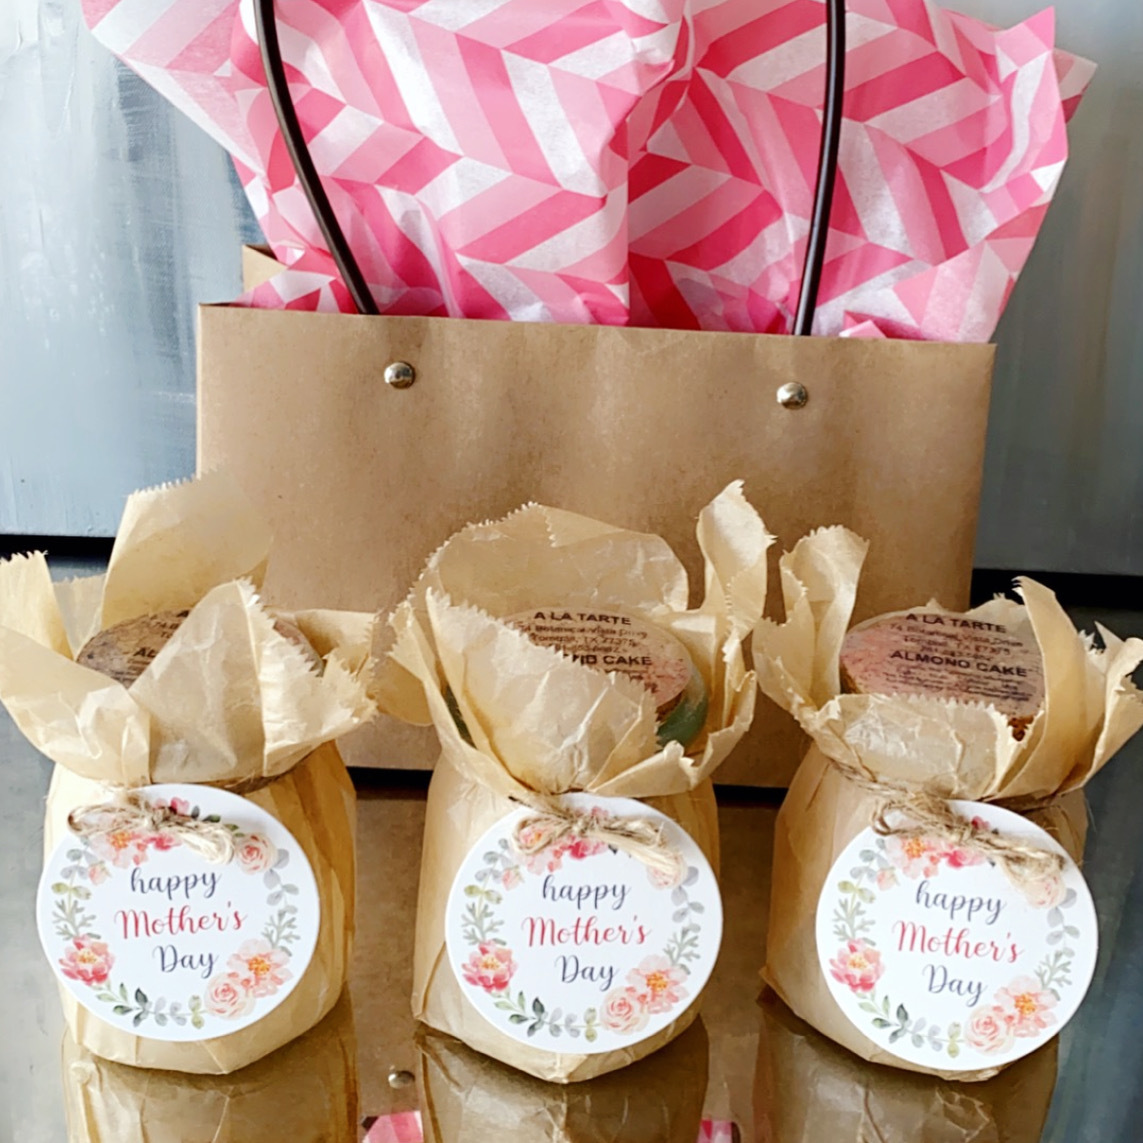 HOLIDAY / SPECIAL DAY CAKE JAR GIFT SET